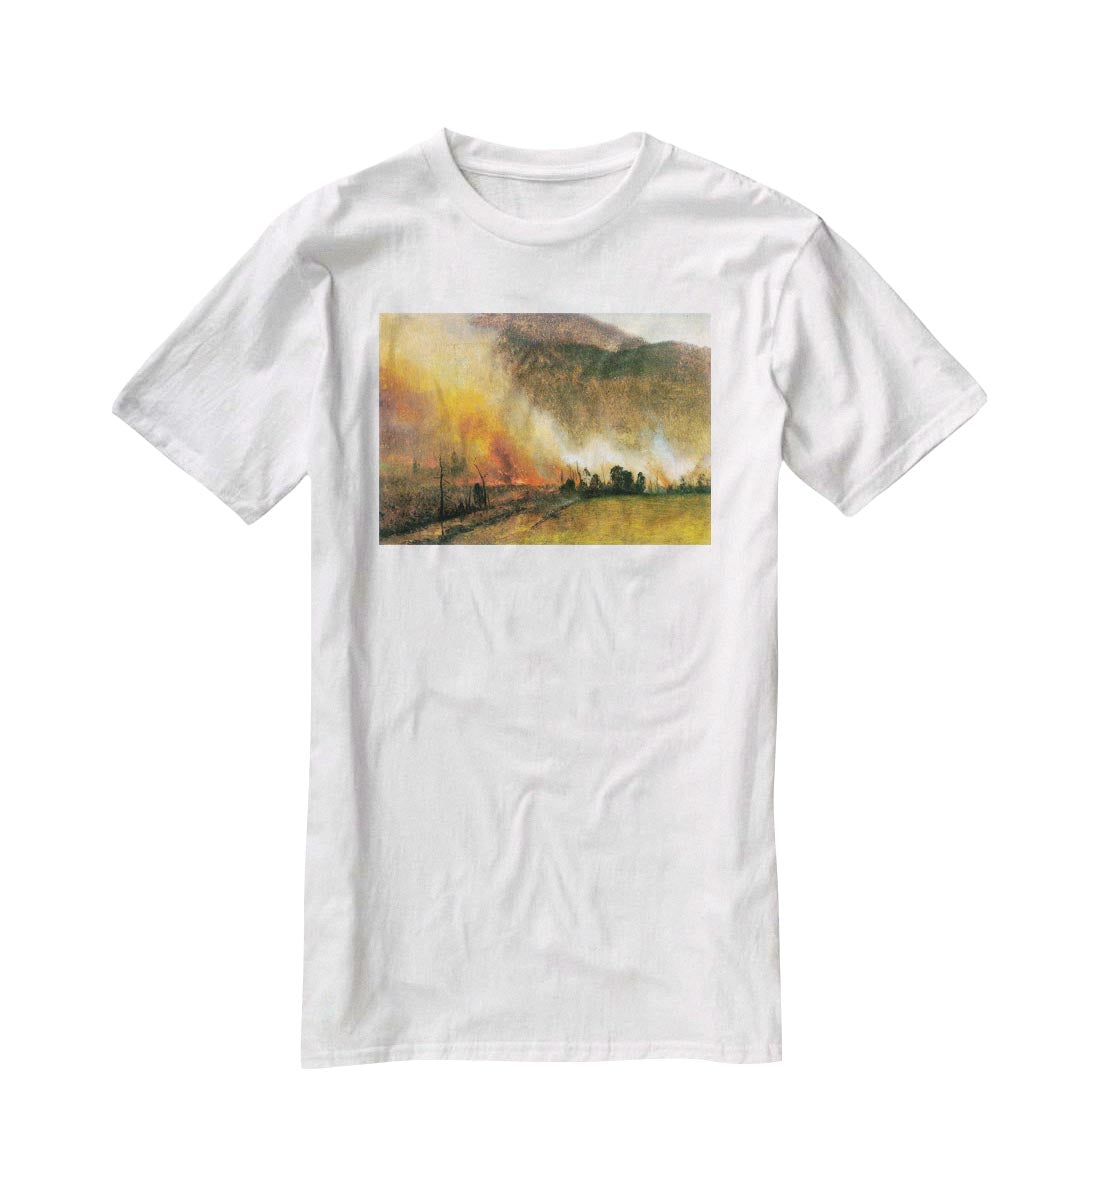 White Mountains New hampshire 1 by Bierstadt T-Shirt - Canvas Art Rocks - 5